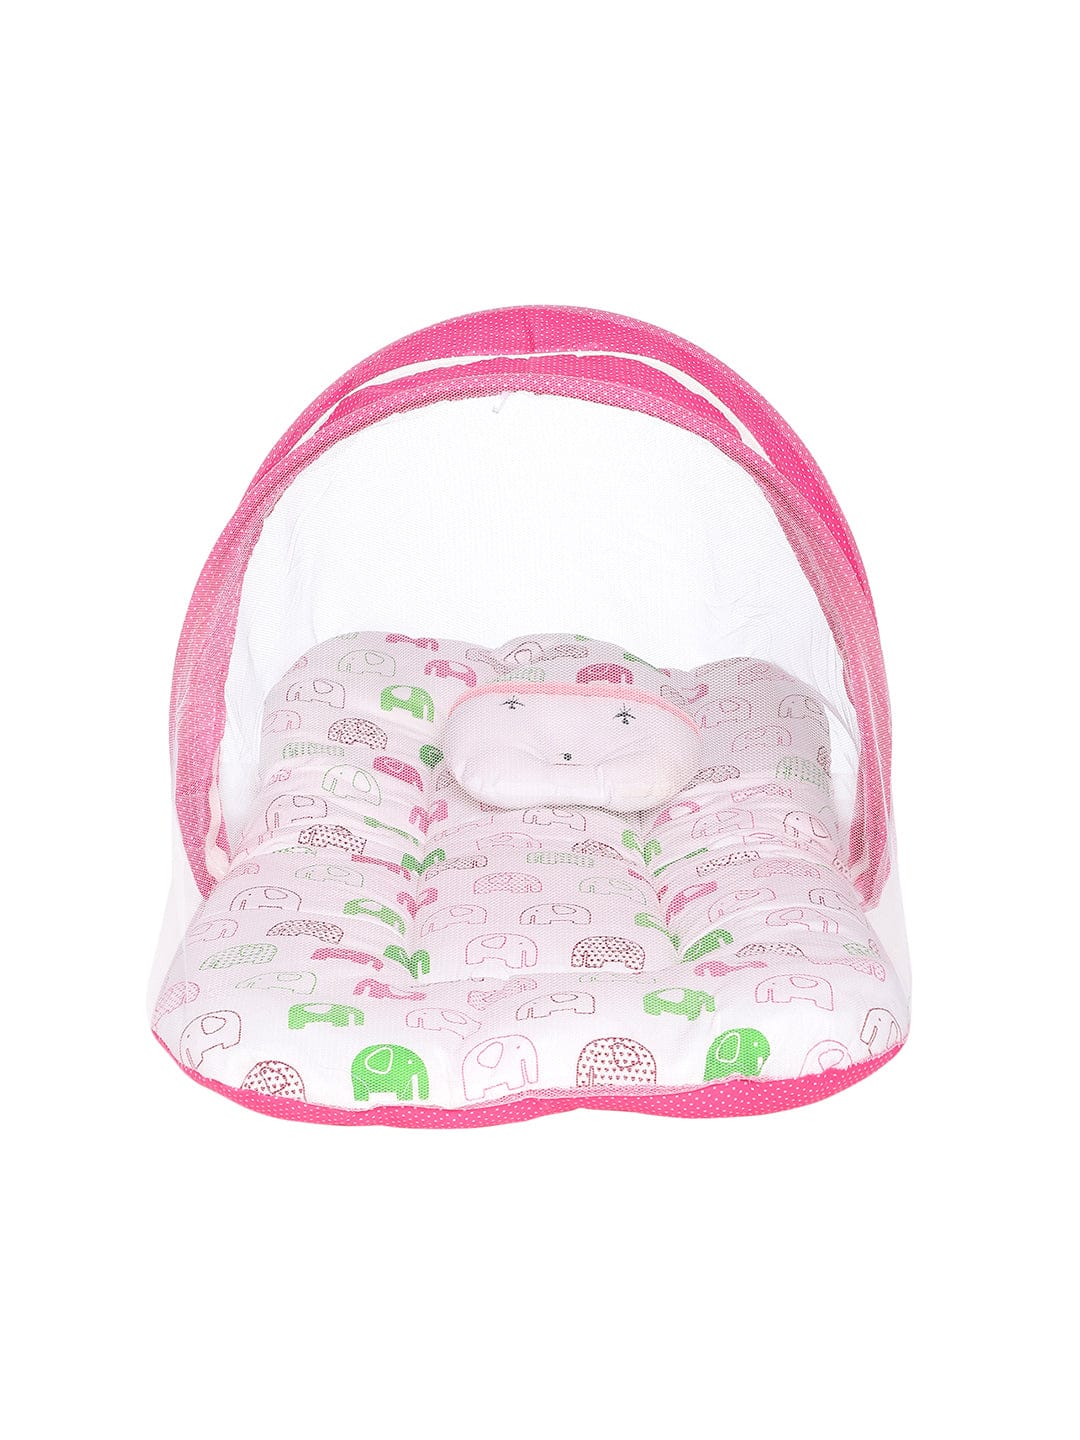 Infants Printed Bedding Set with Mosquito Net (White & Pink)